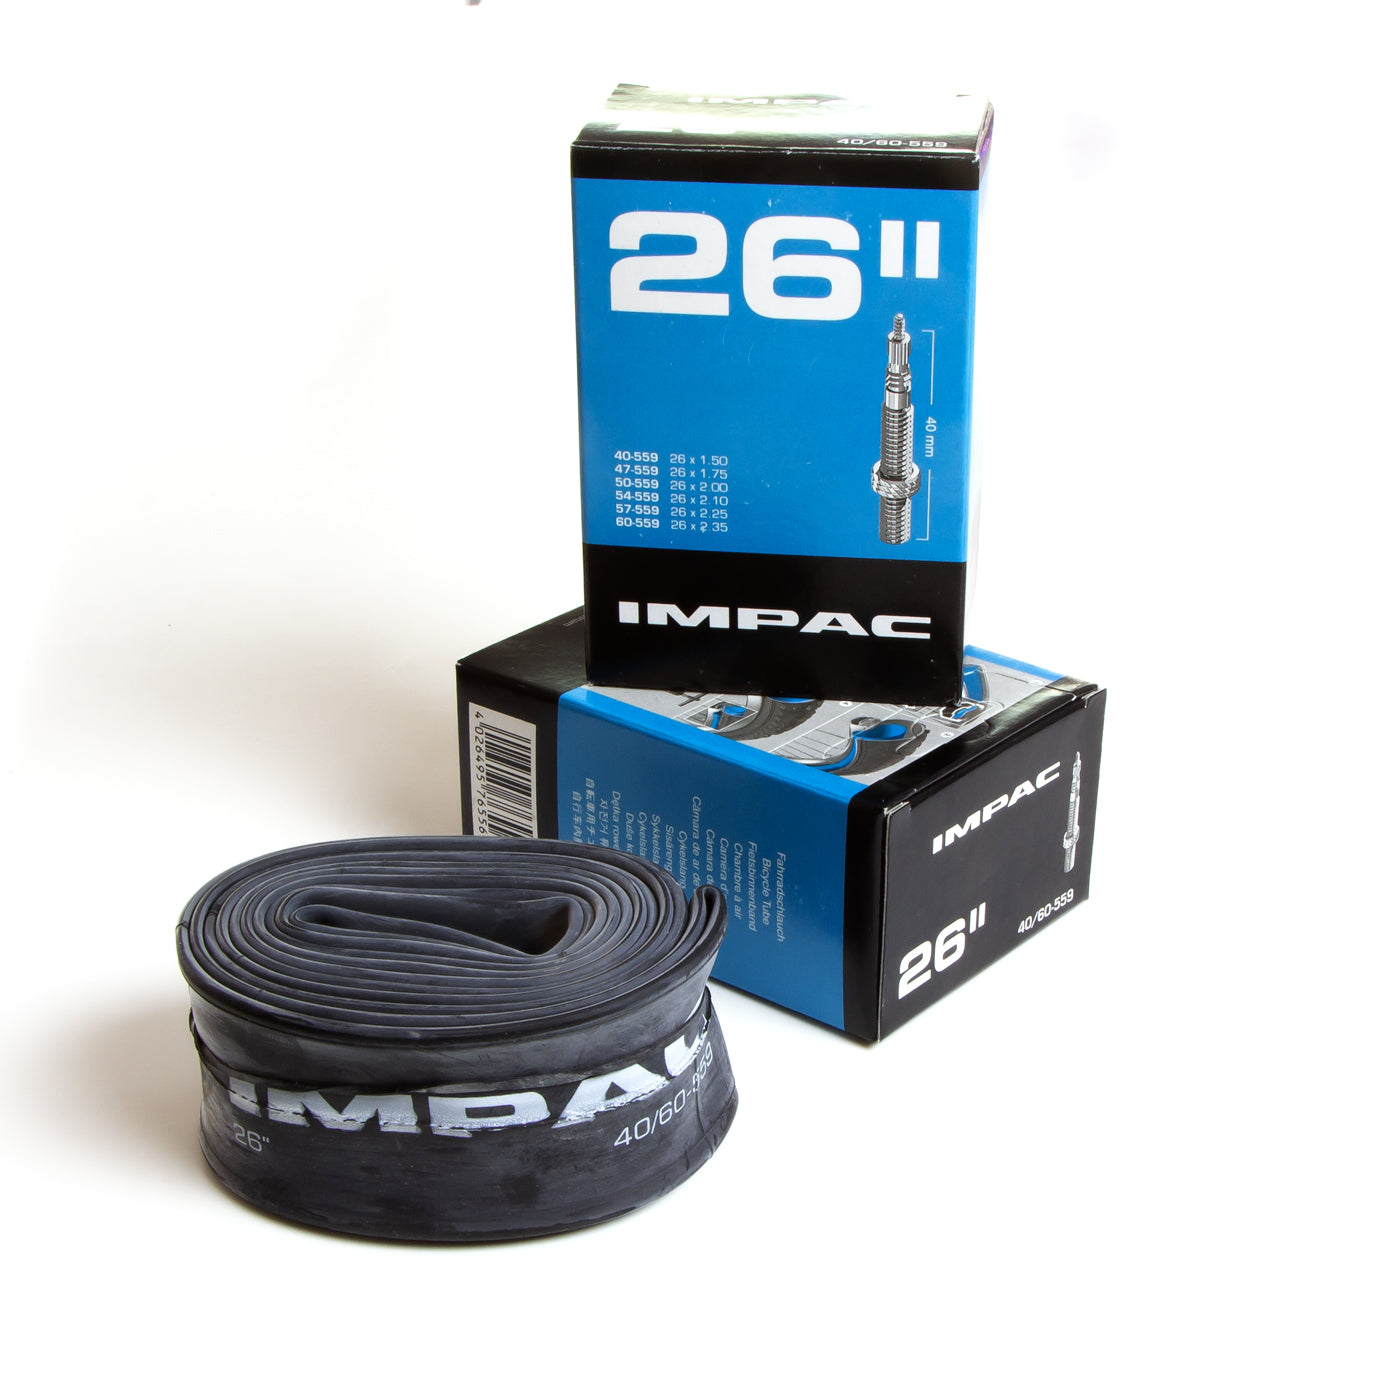 View 26 Inner Tubes 2 Pack information